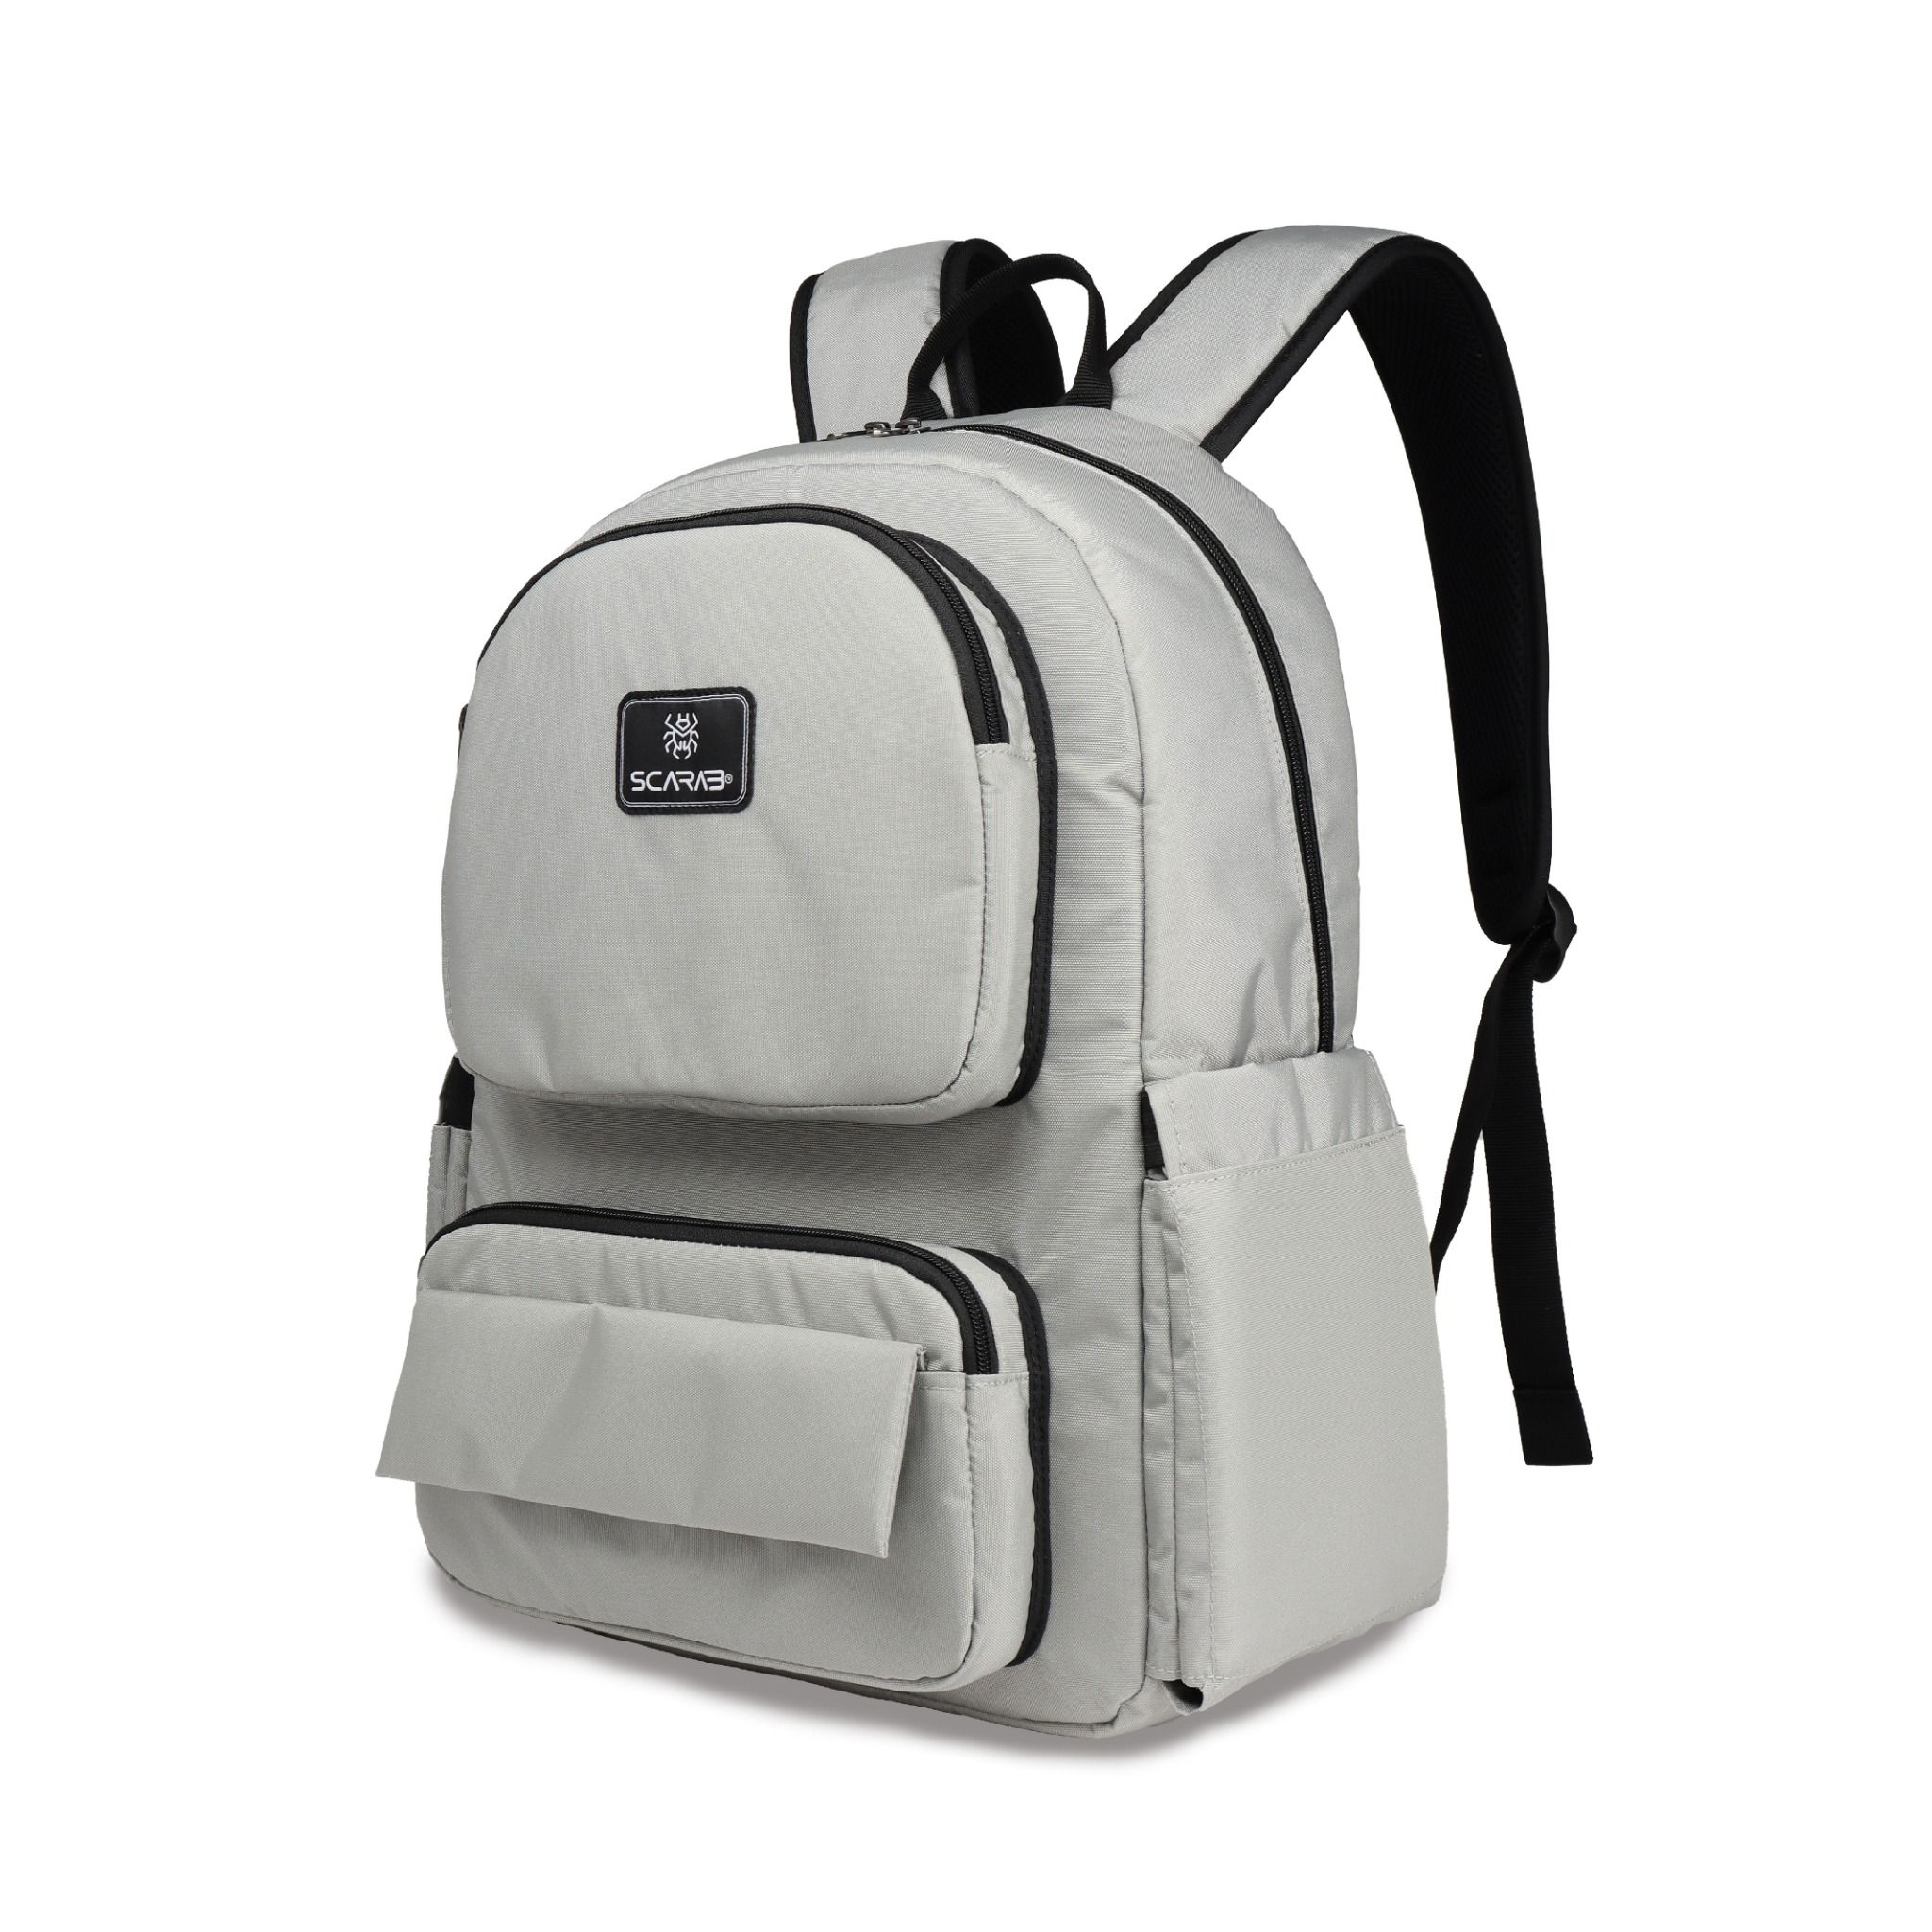  FUSSY VERSION 2 PACK BACKPACK - GREY 